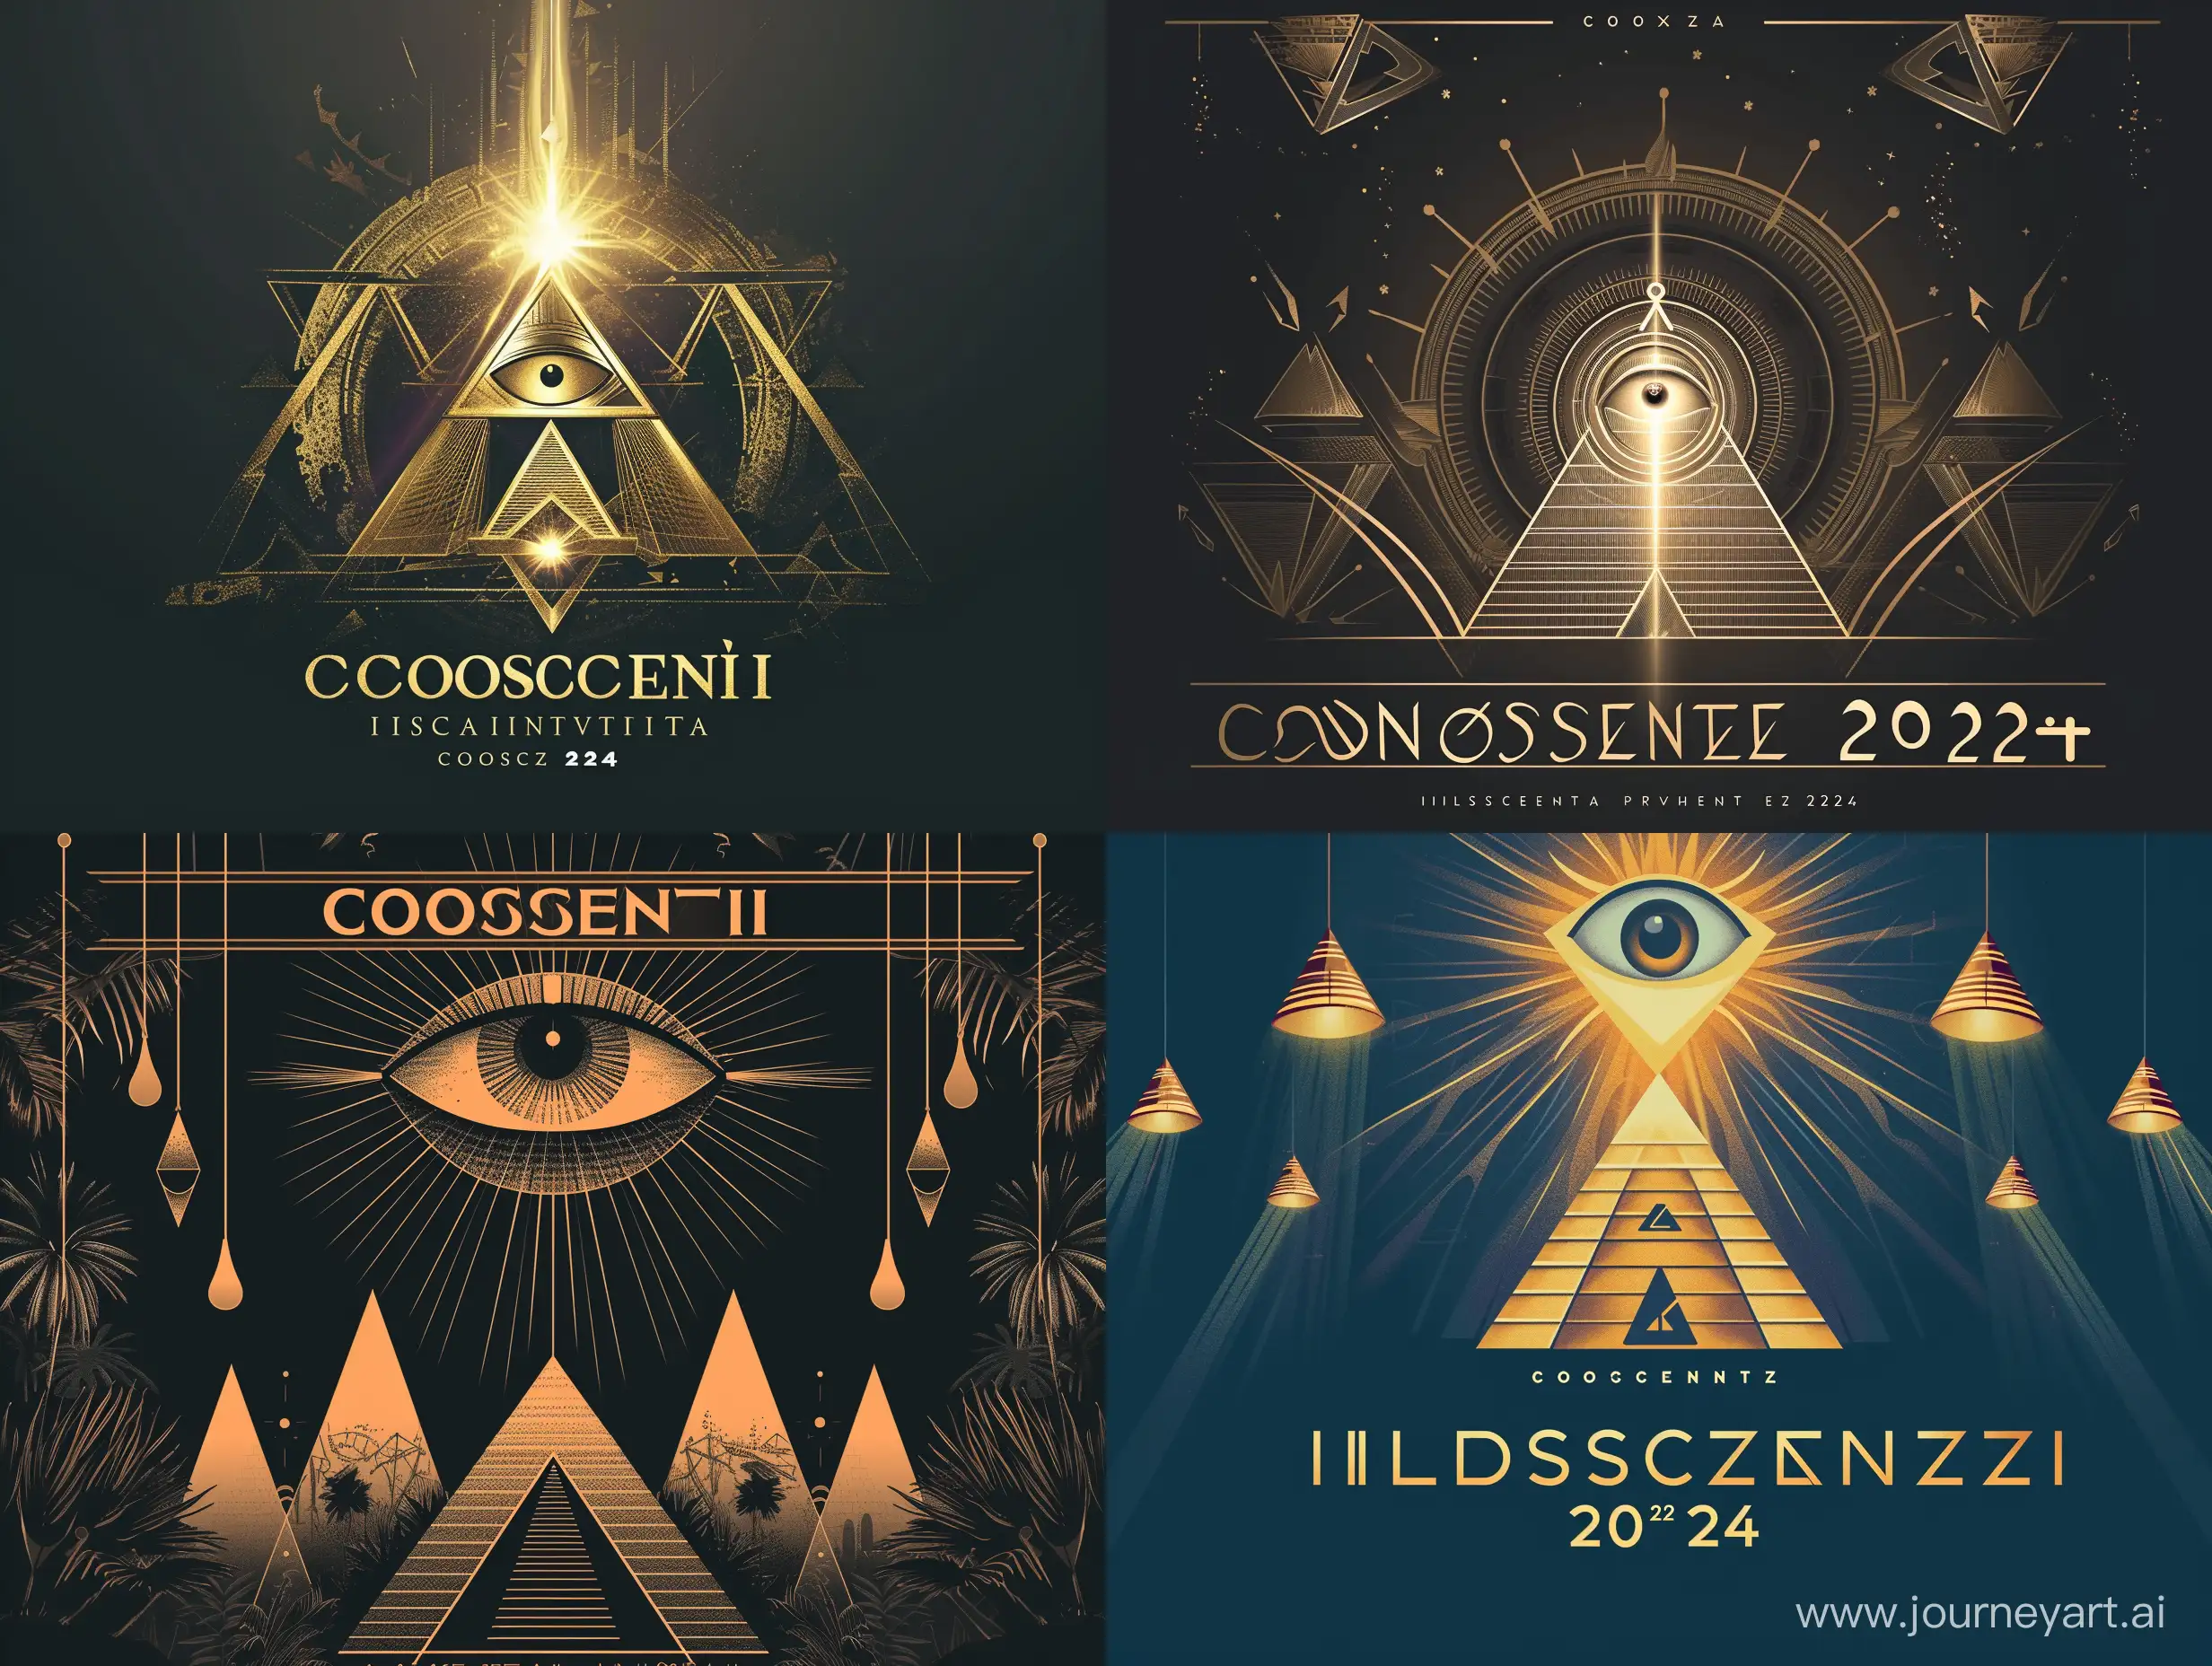 Generate a title logo for the event "Conoscenza 2024" with the theme of Illuminati reflected in the graphics. Incorporate symbolic elements associated with the Illuminati, such as the Eye of Providence, pyramid structures, mysterious symbols, and subtle references to secrecy and enlightenment. The design should evoke a sense of intrigue and mystery while maintaining a modern and sophisticated aesthetic suitable for the event's theme and audience.